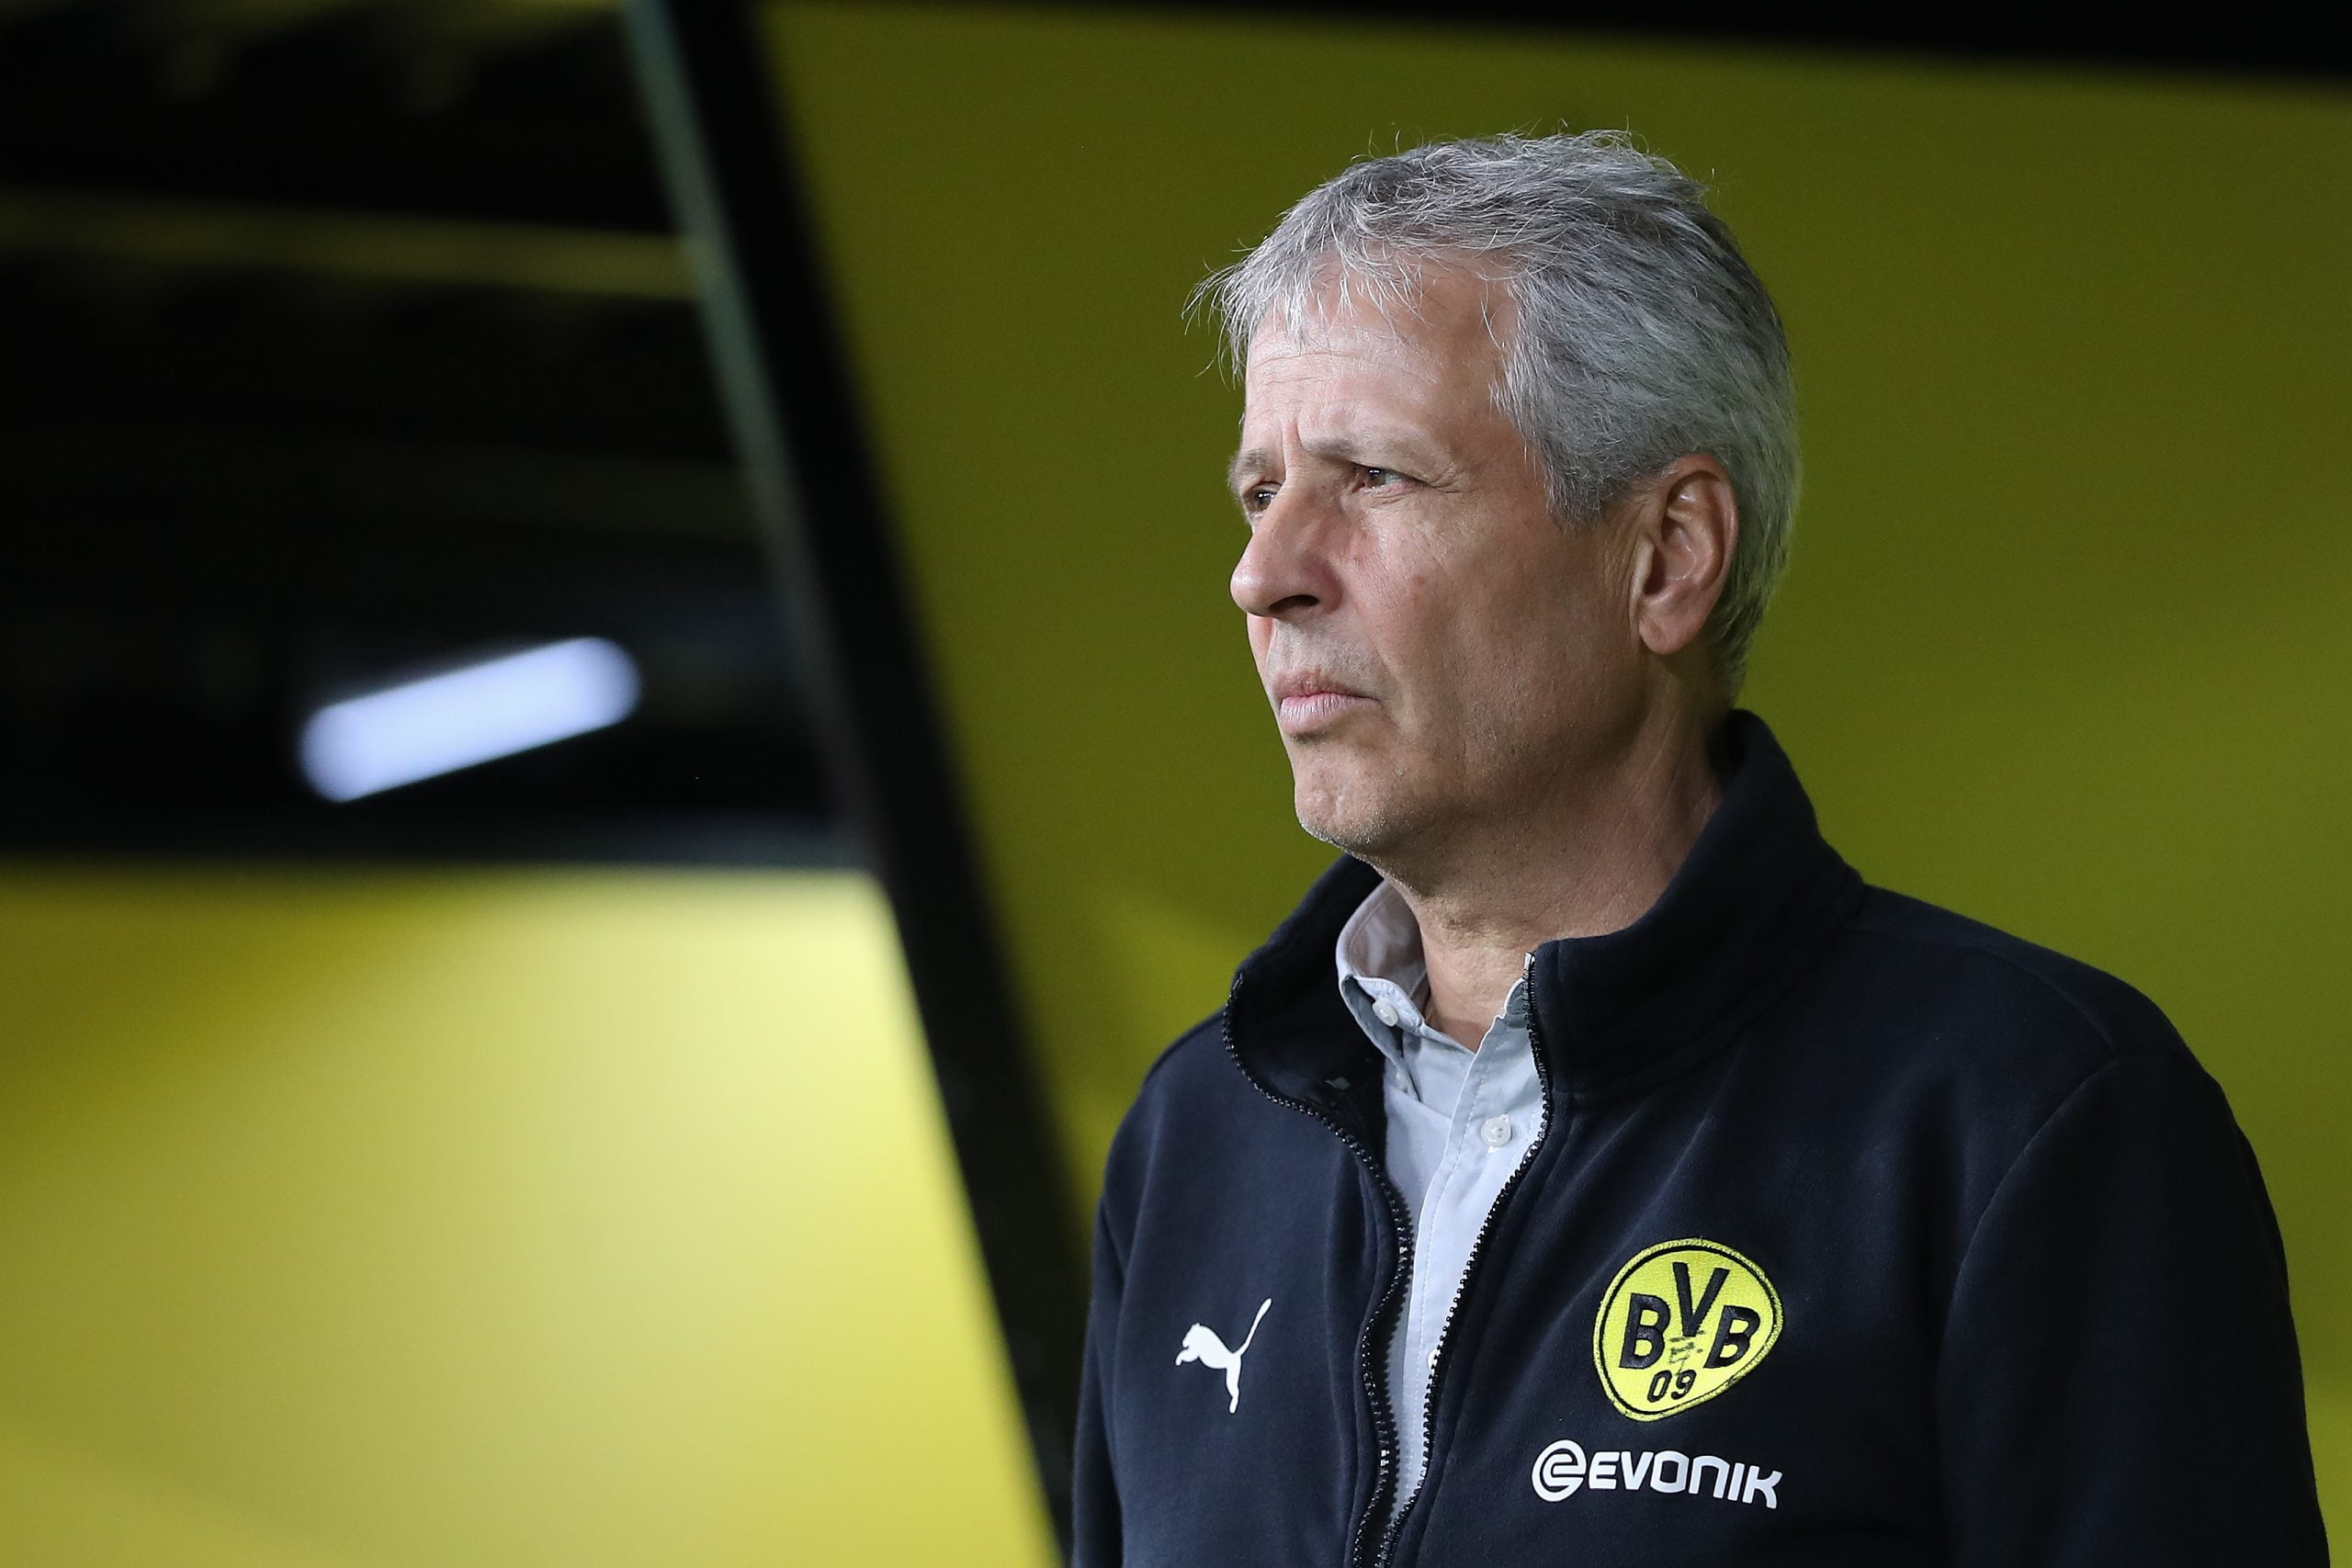 Borussia Dortmund host FC Schalke in the Revierderby - Can Favre guide his team to a victory?